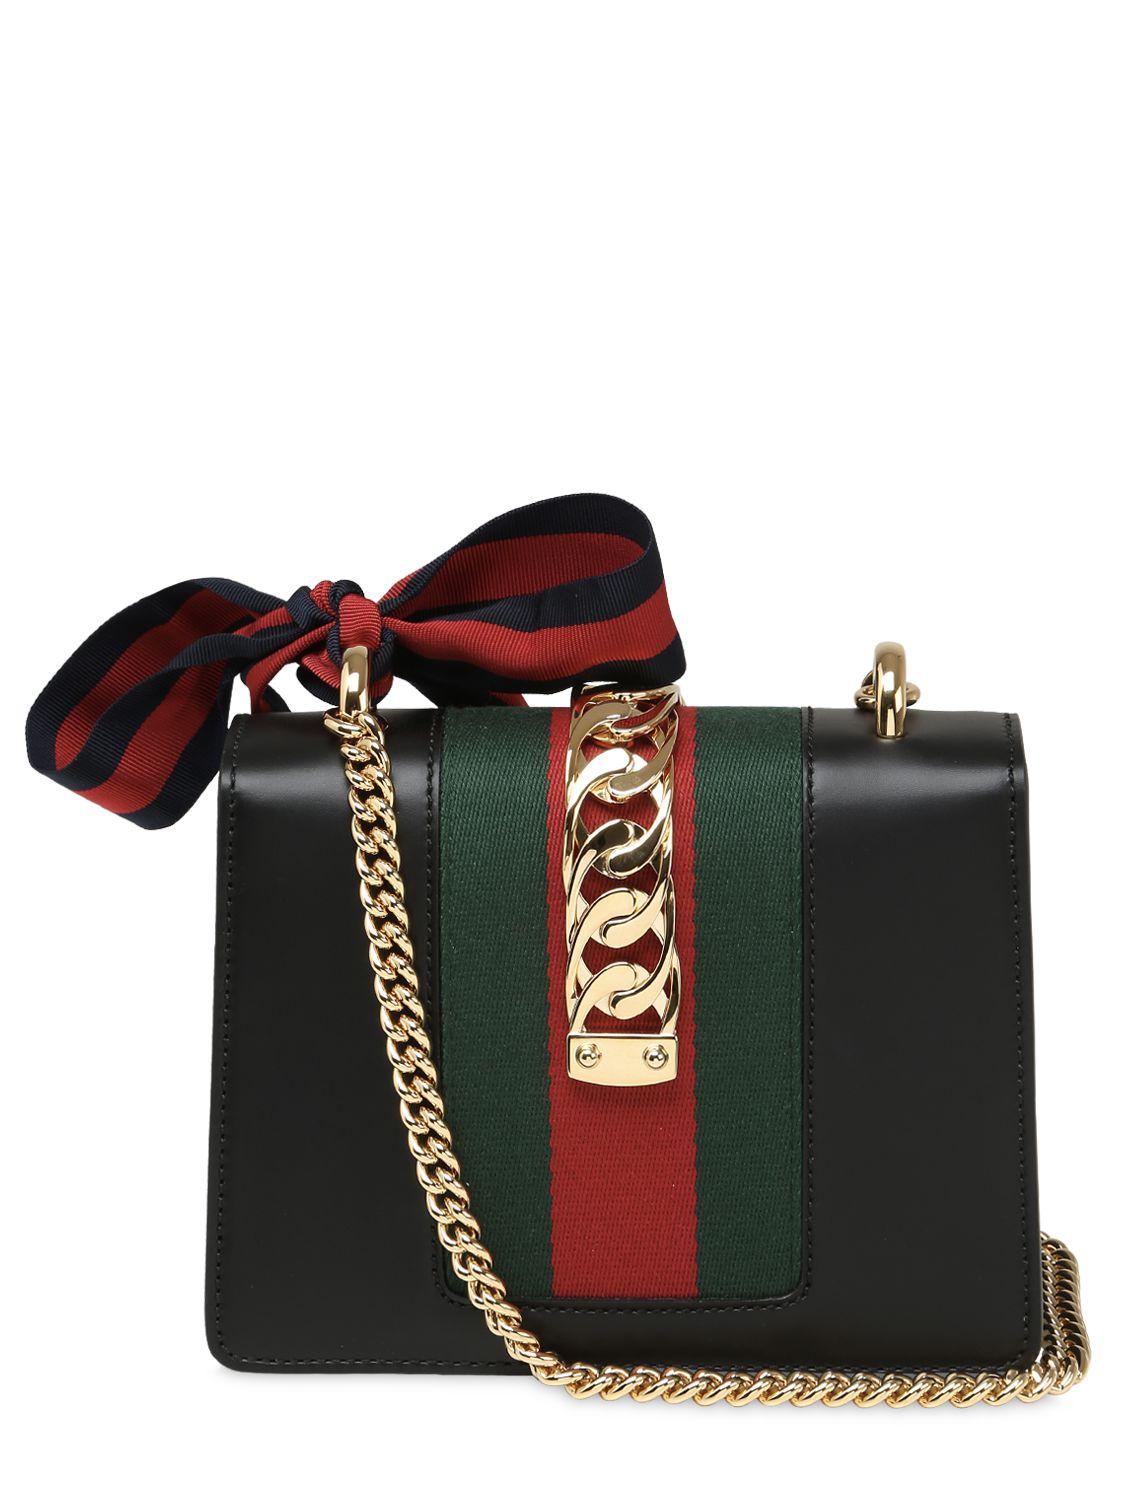 Lyst - Gucci Mini Sylvie Leather Chain Shoulder Bag in Black